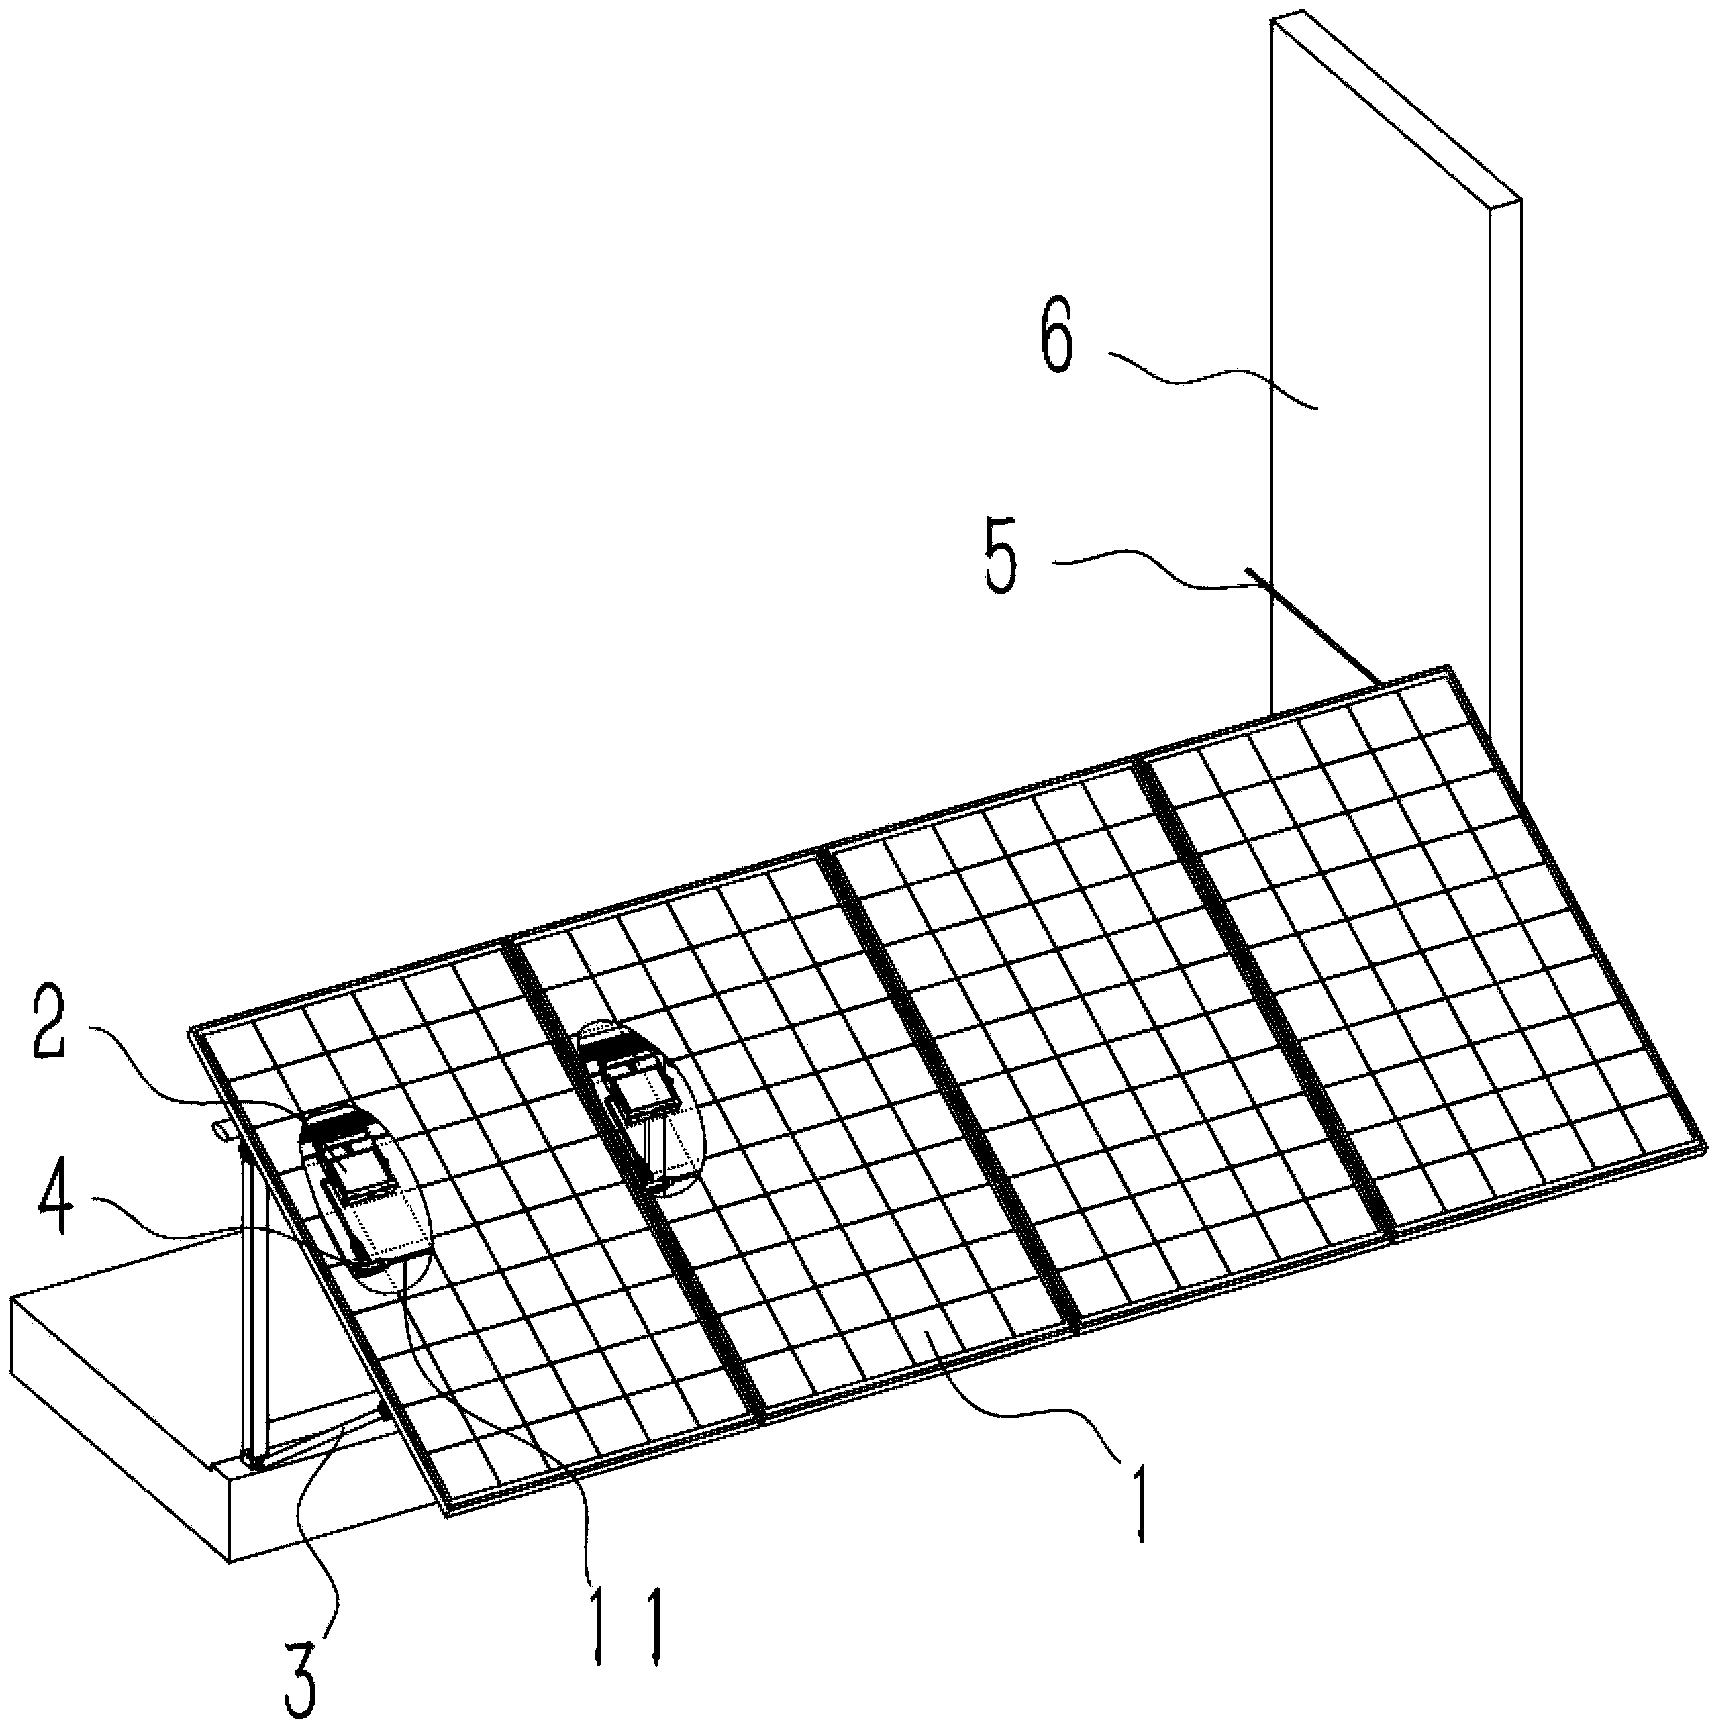 Photovoltaic grid-connected power generation system for residential buildings